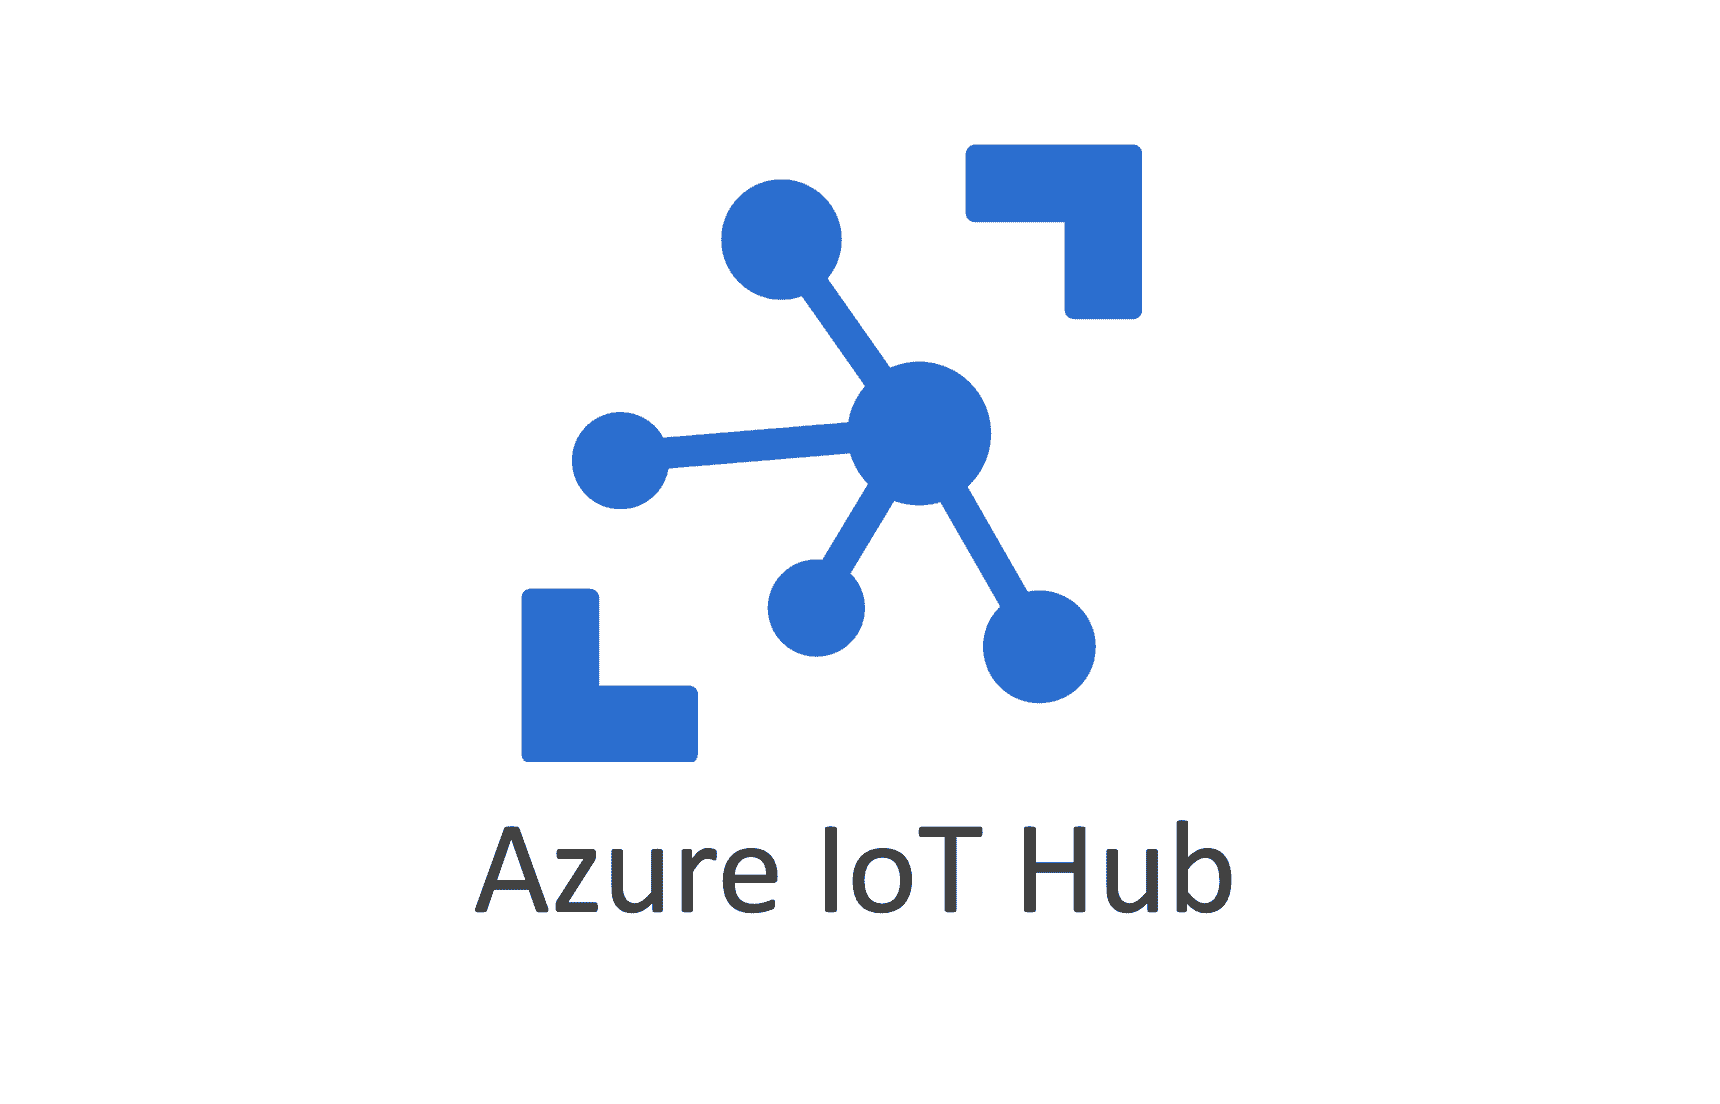 Azure IoT Hub provides a cloudhosted solution to virtually connect any